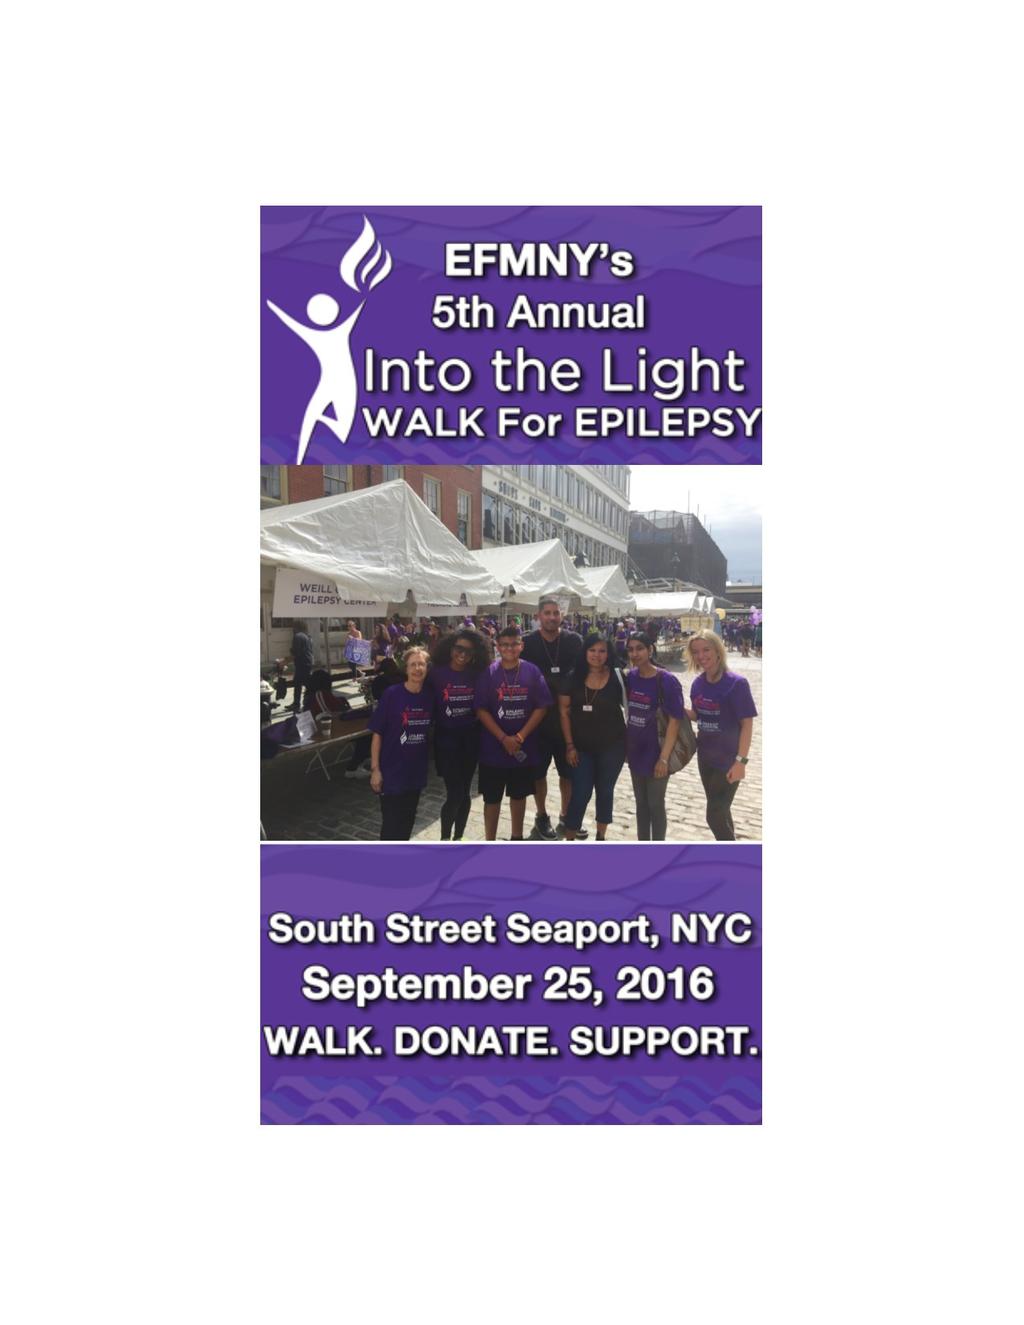 Are YOU ready to walk for Epilepsy?